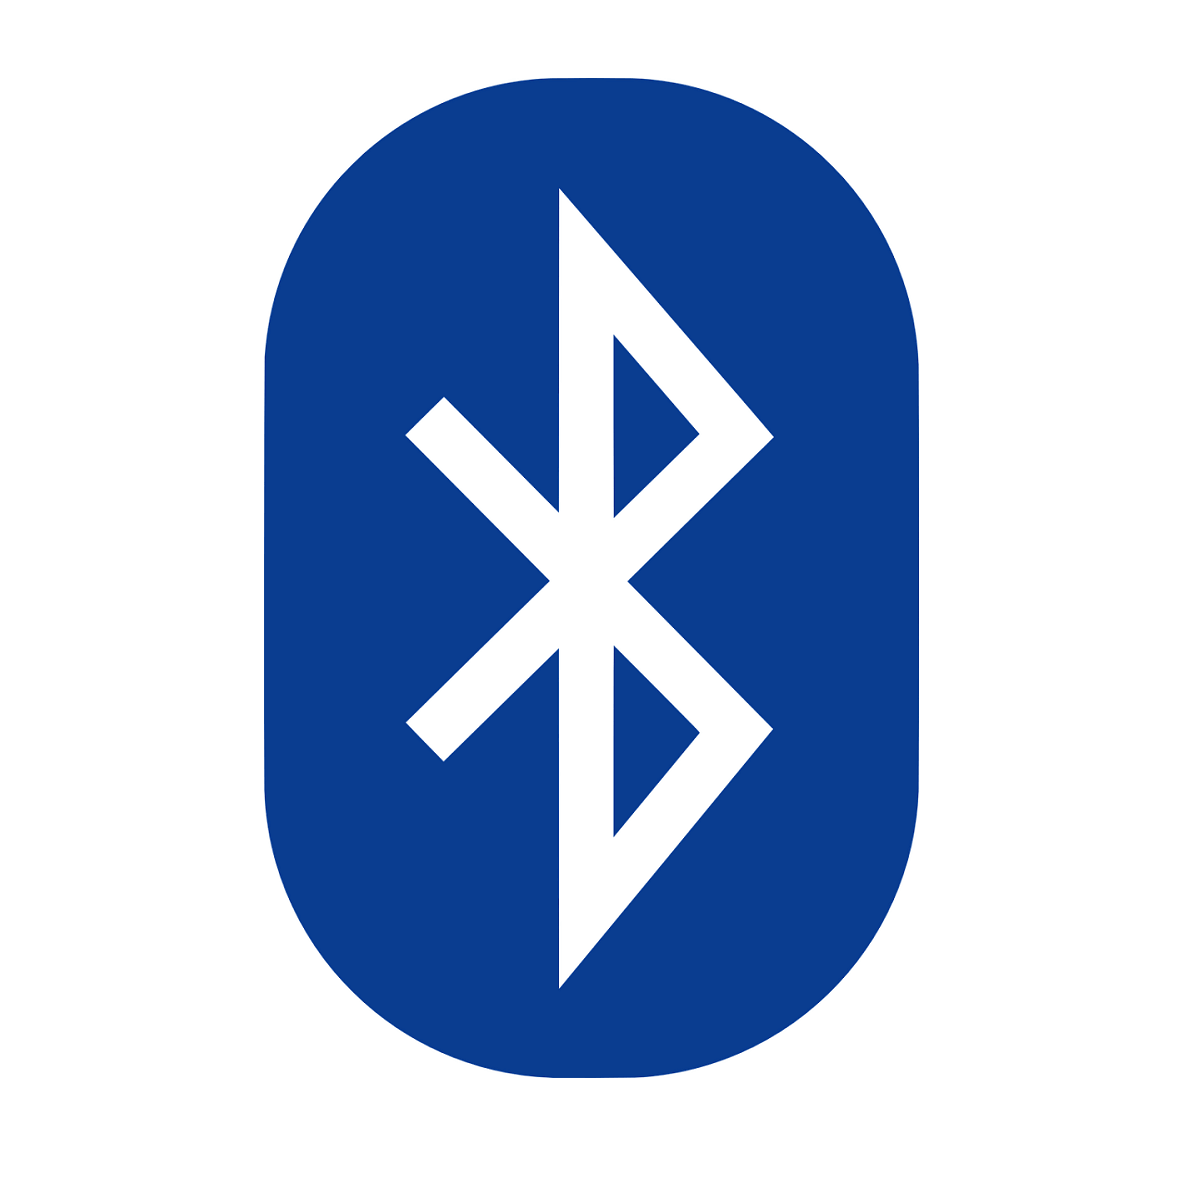 Do you have Bluetooth on your PC? Here's how you can check